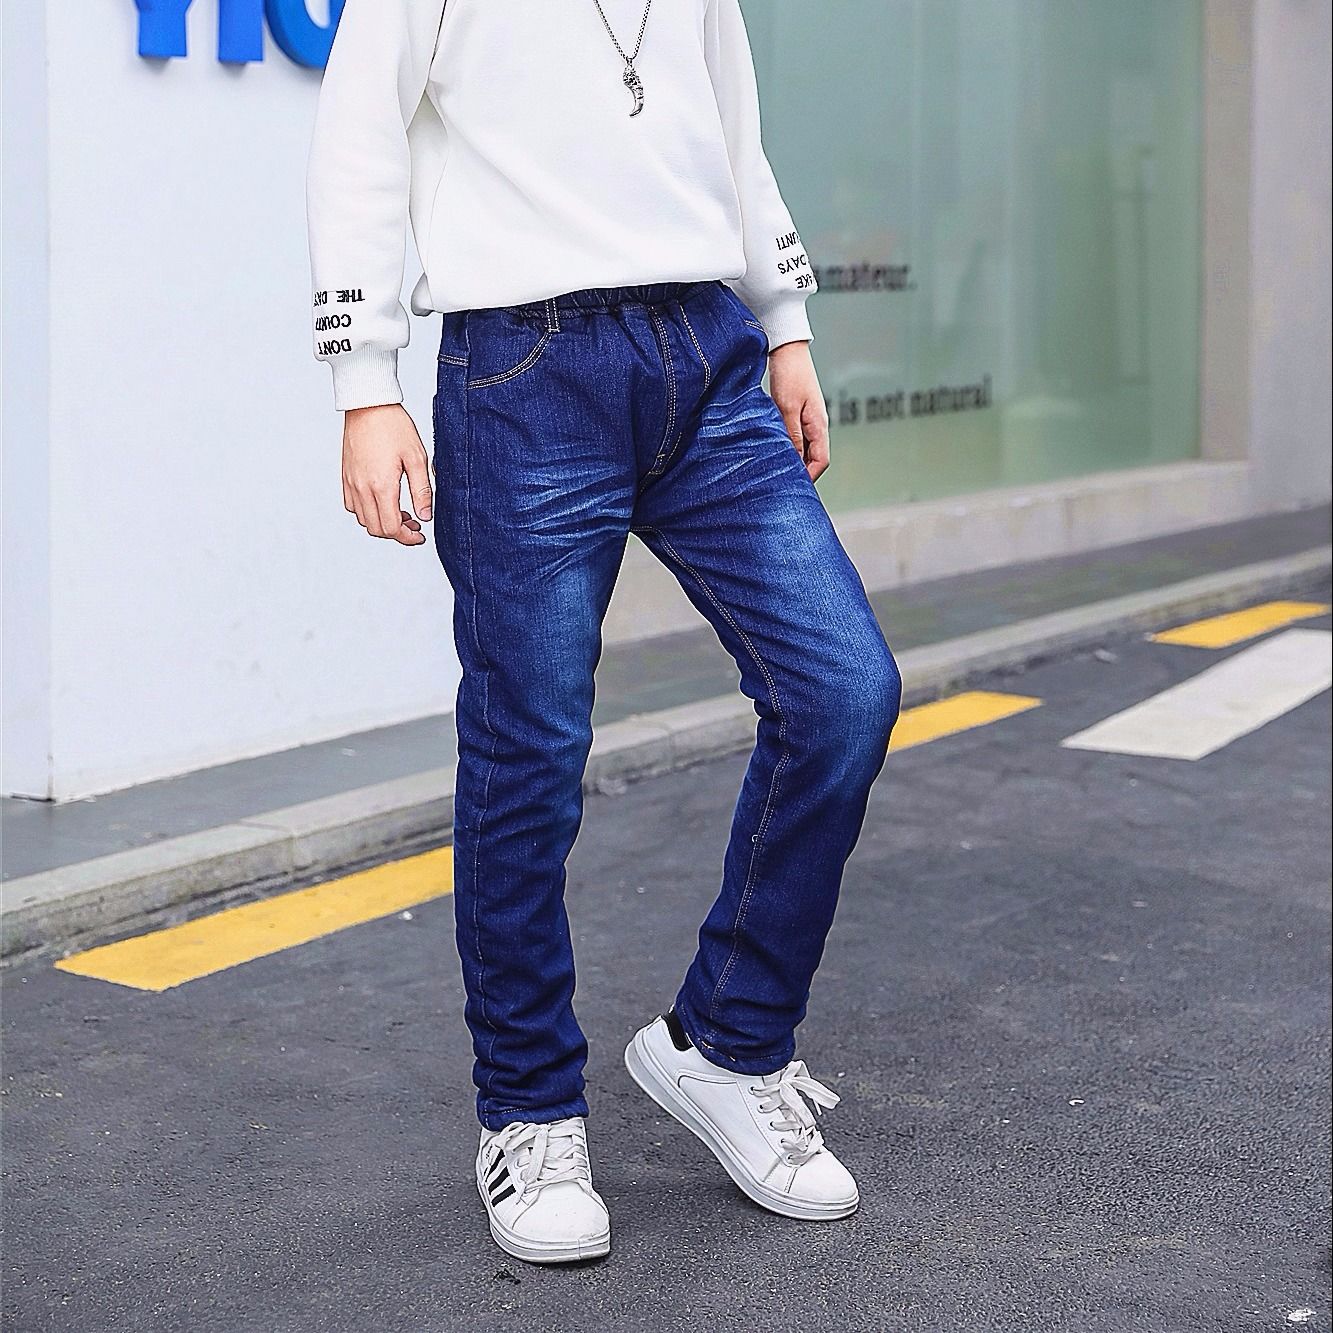 Boys' jeans spring and autumn 2023 new style medium and large boys junior high school students primary school students loose straight casual pants